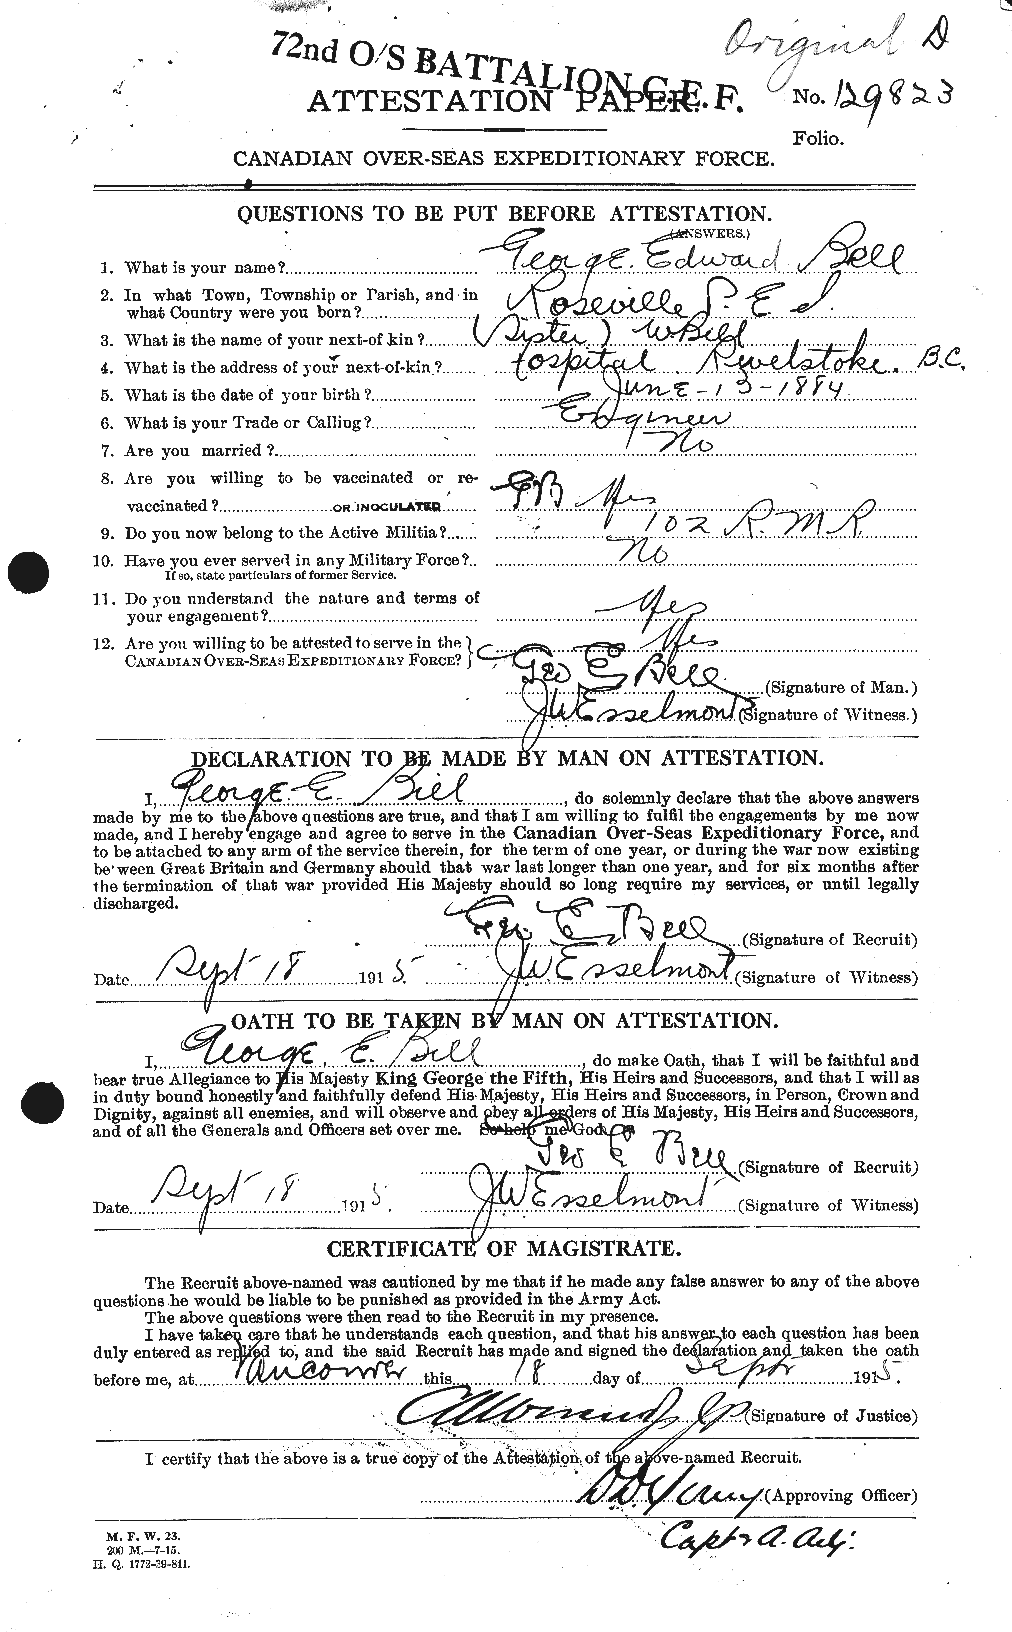 Personnel Records of the First World War - CEF 234177a